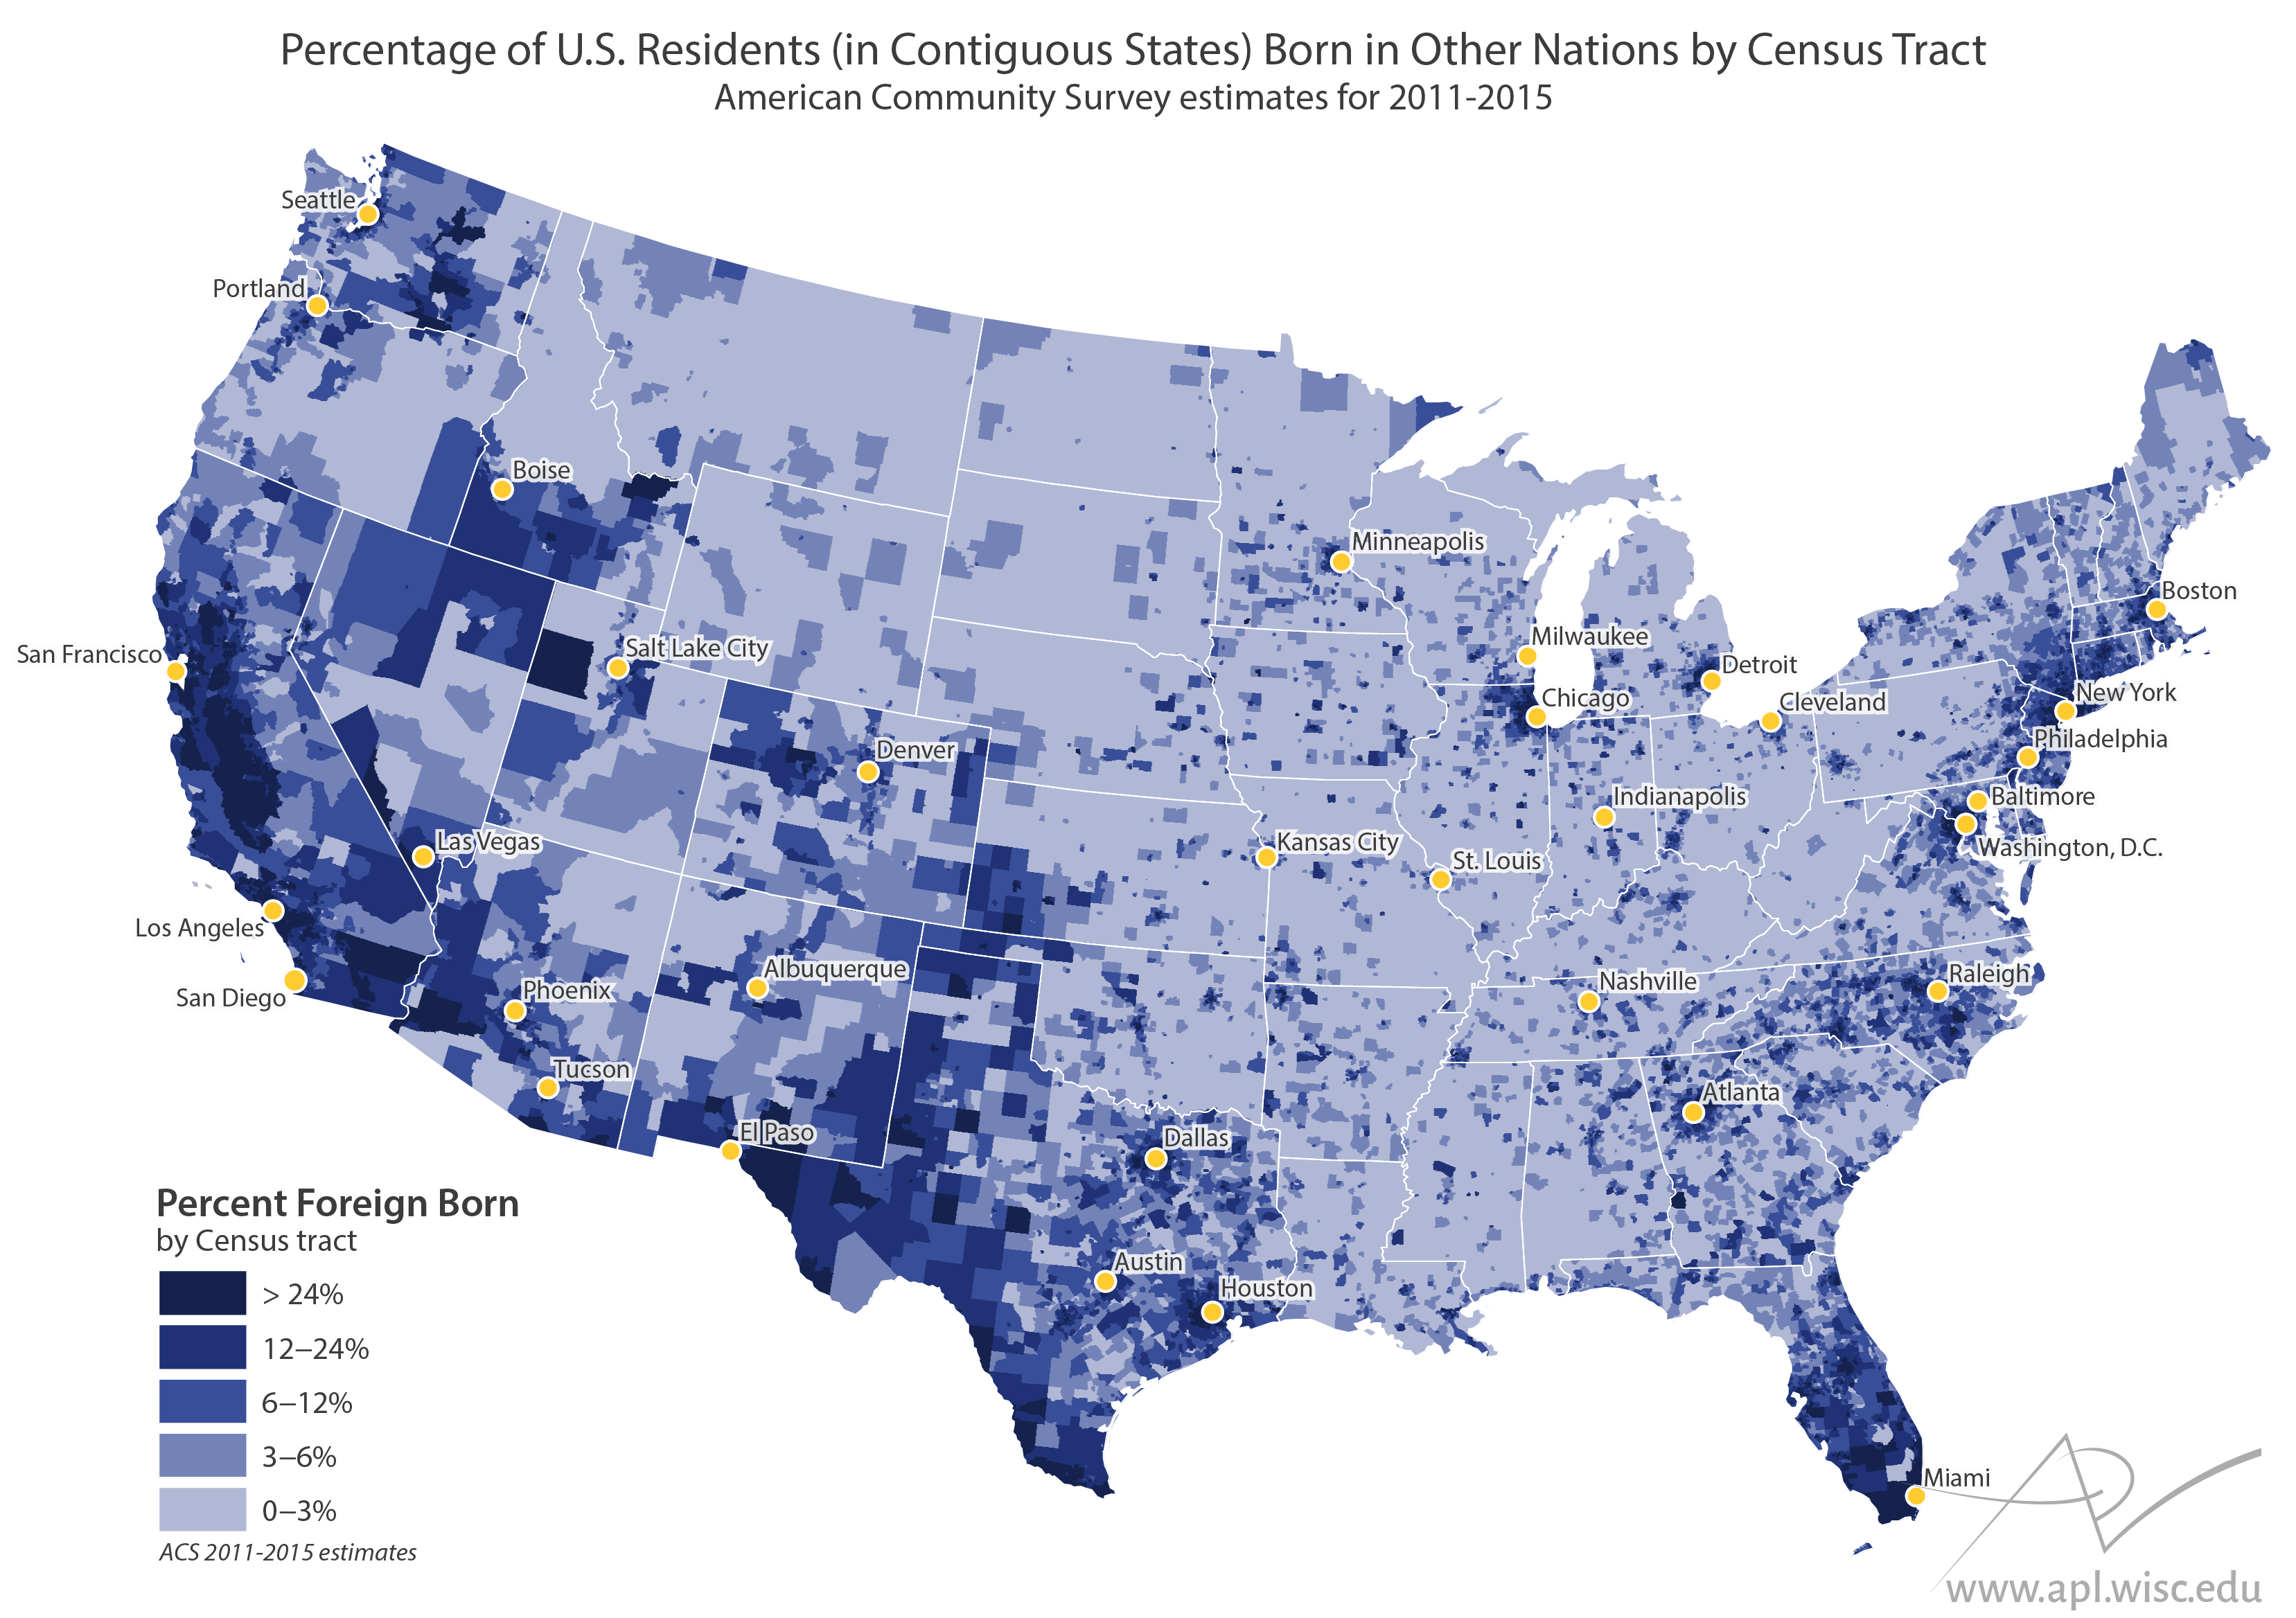 map of contiguous US showing percent foreign-born residents by Census tract